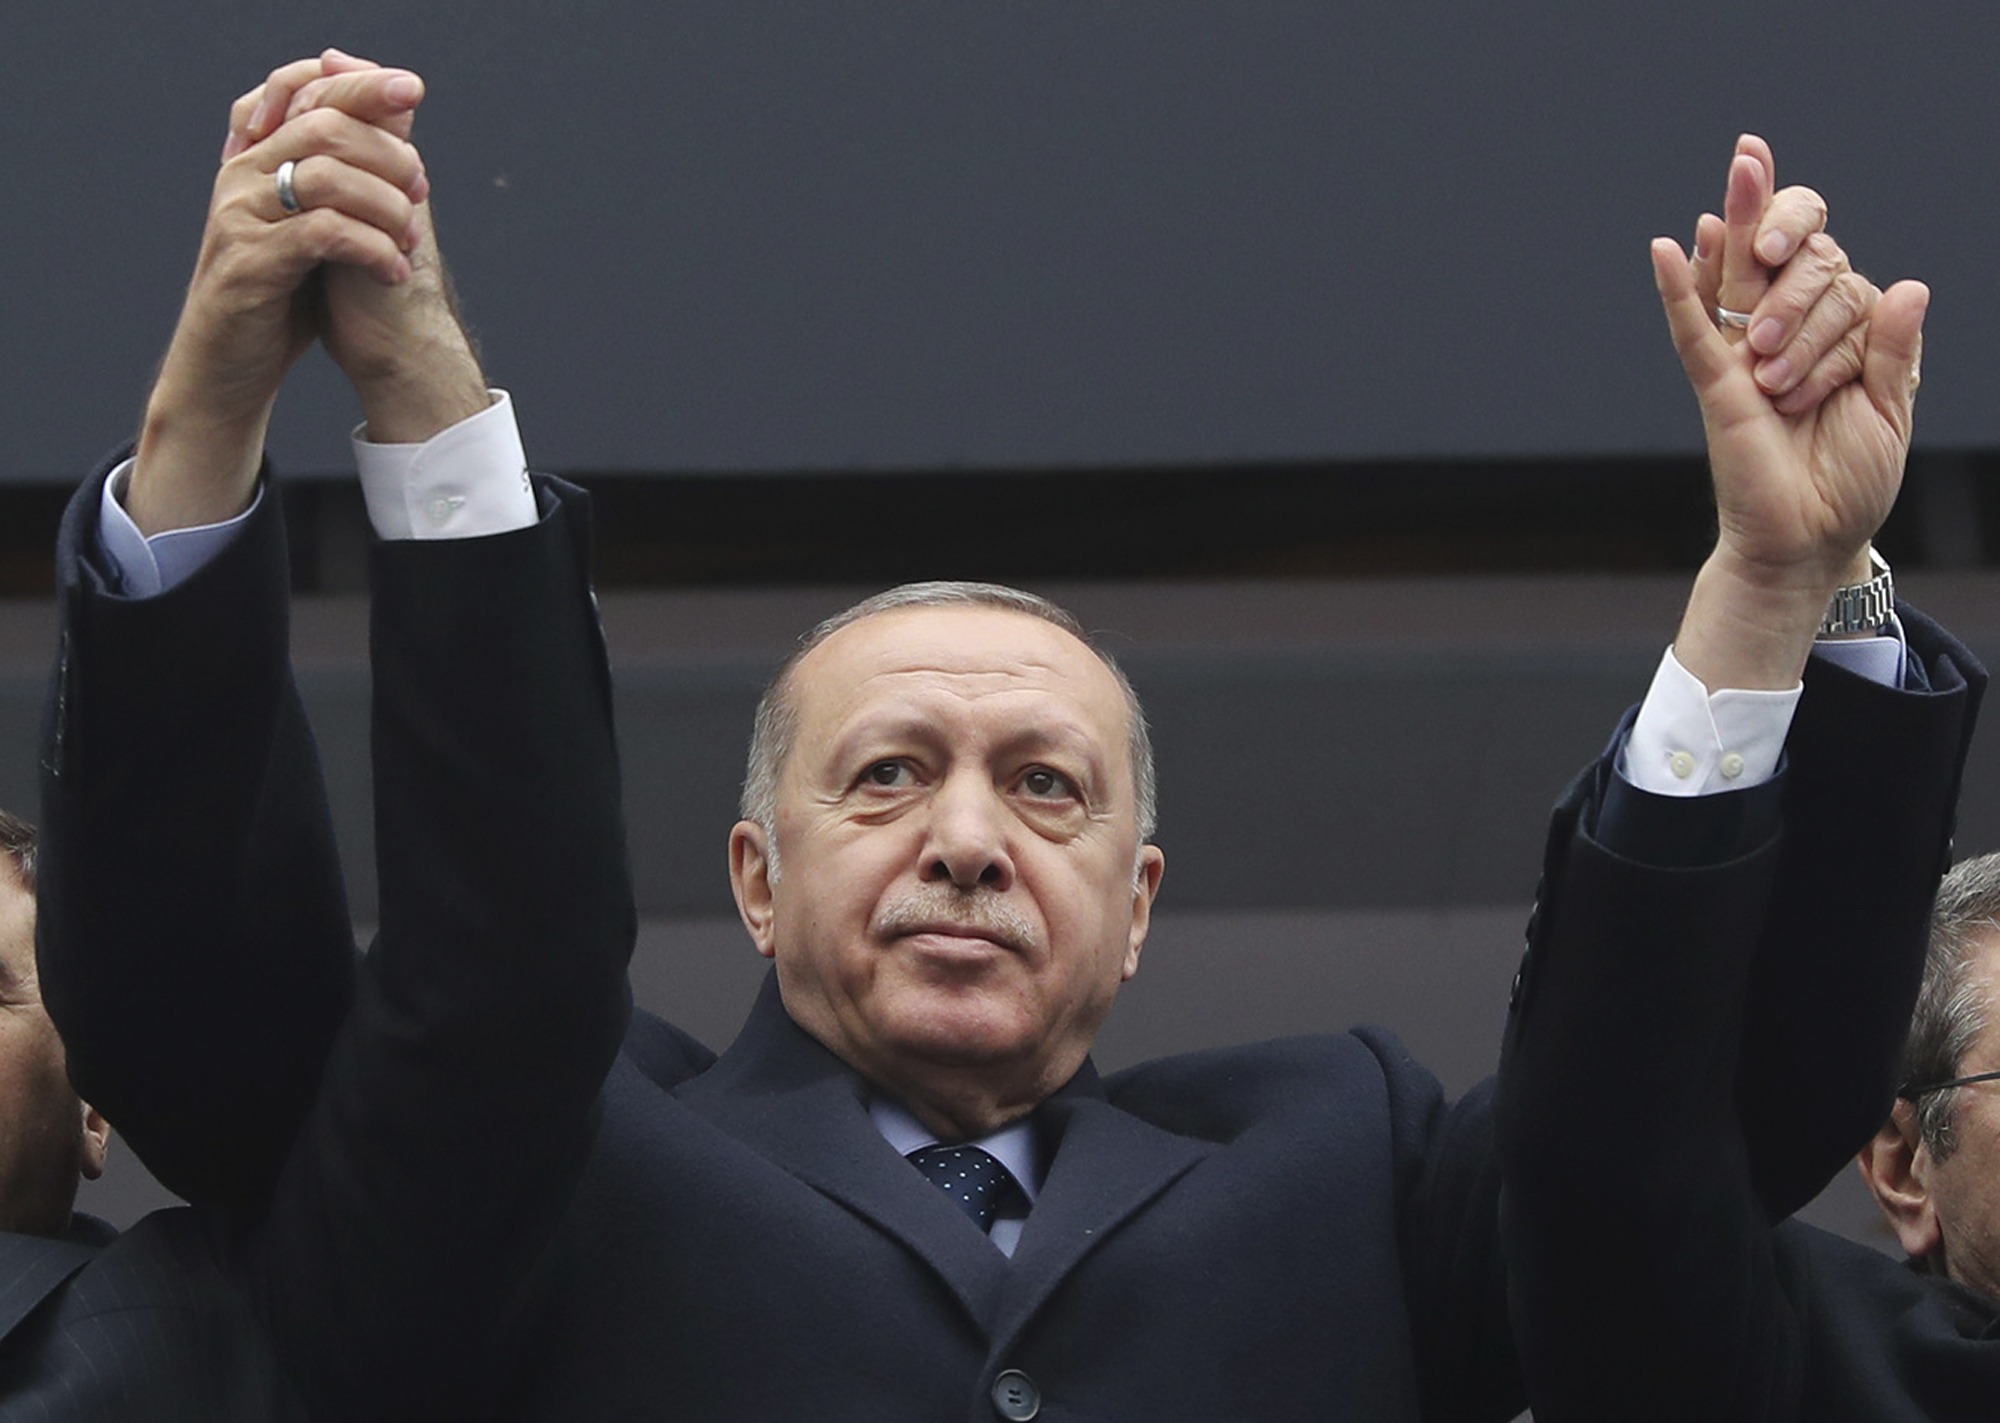  Turkey's decision to cut trade ties with Israel impacts global geopolitics.